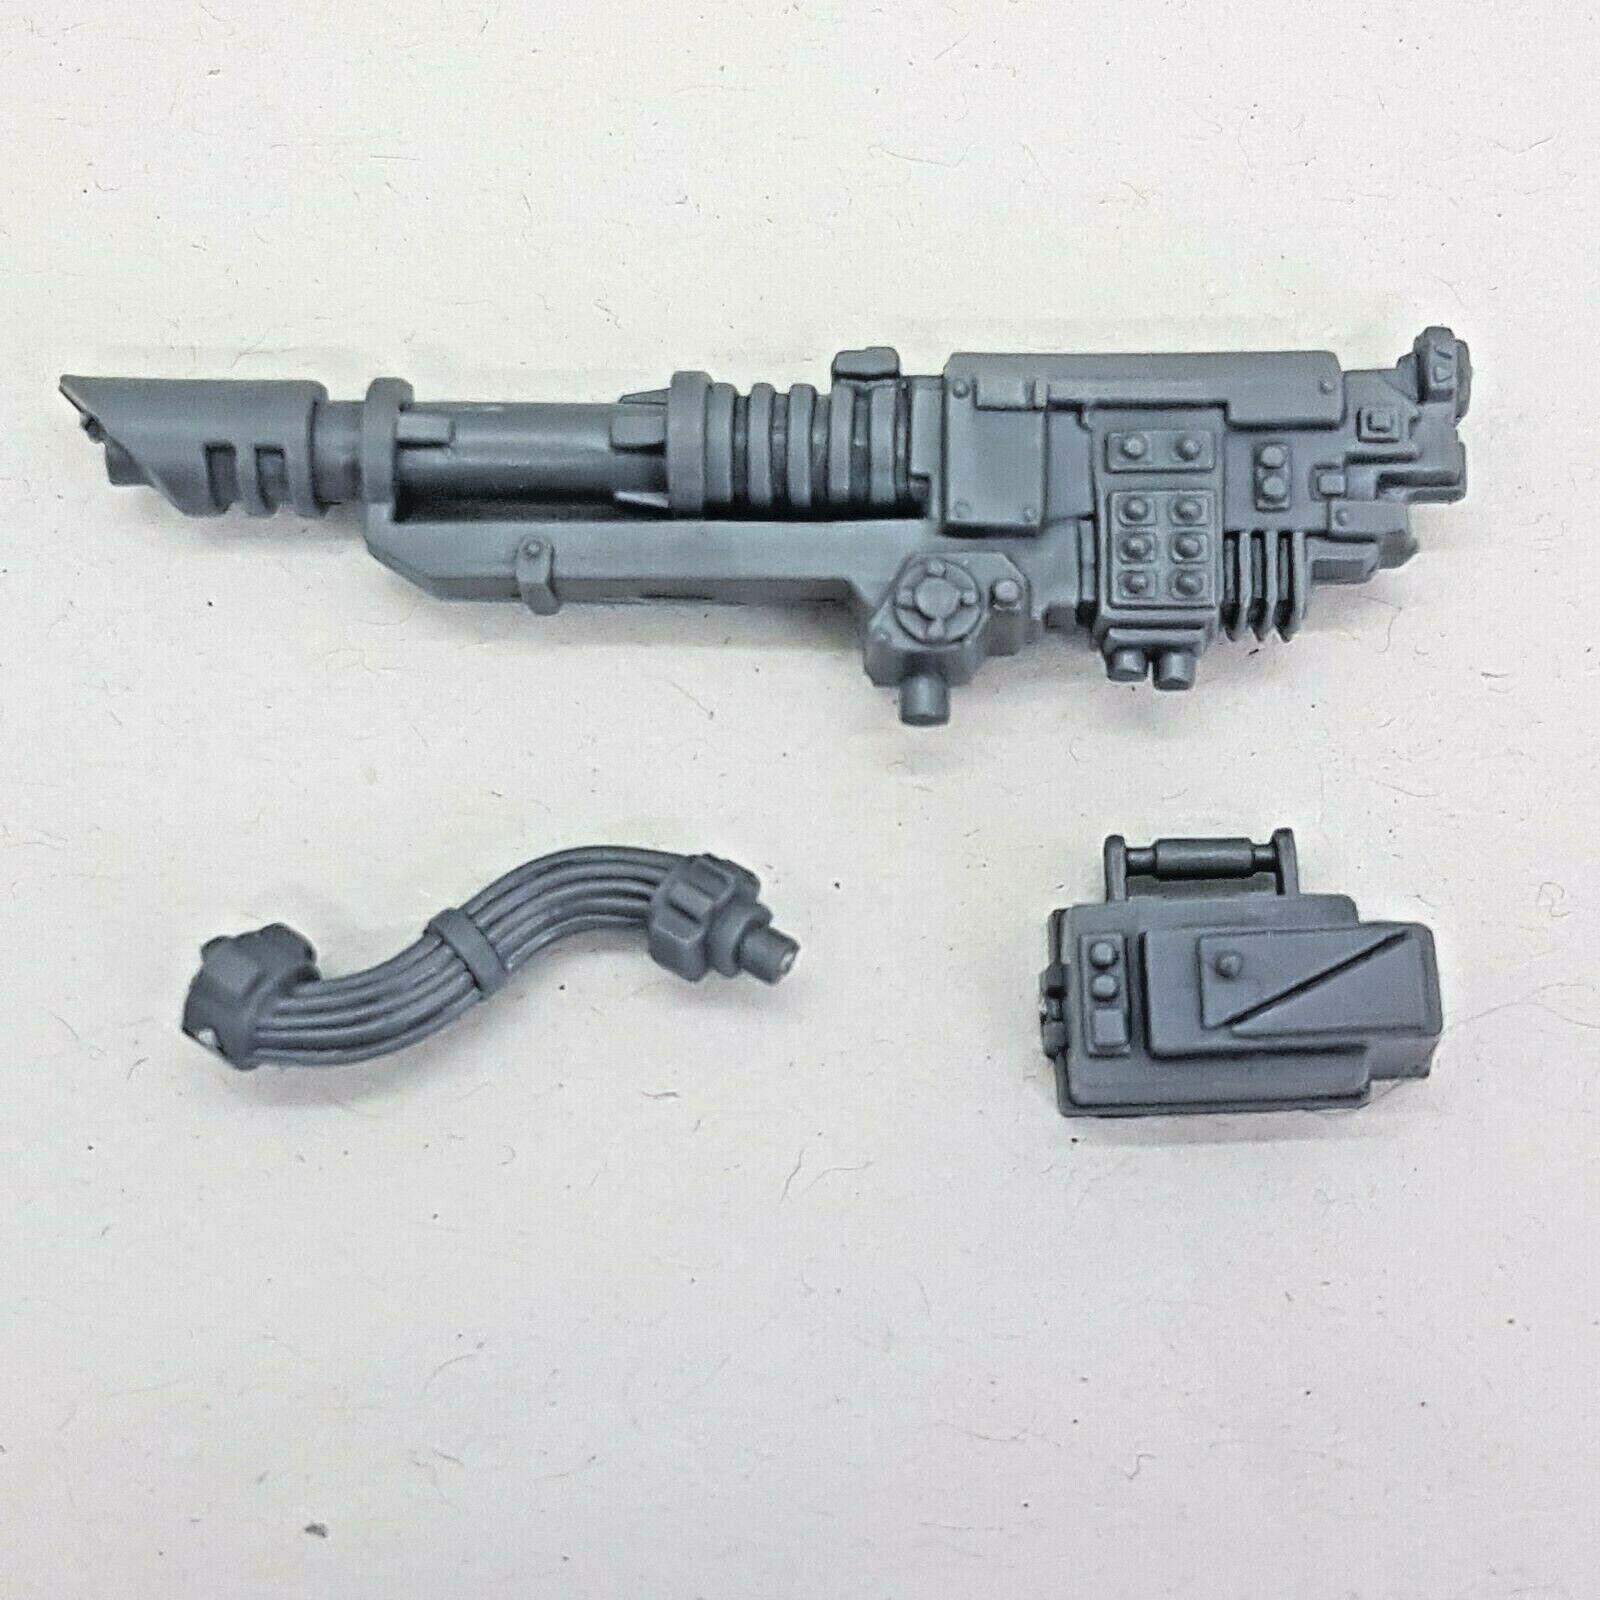 Cadian Heavy Weapon Missile Launcher Shield Warhammer 40k Astra Militarum Bits 